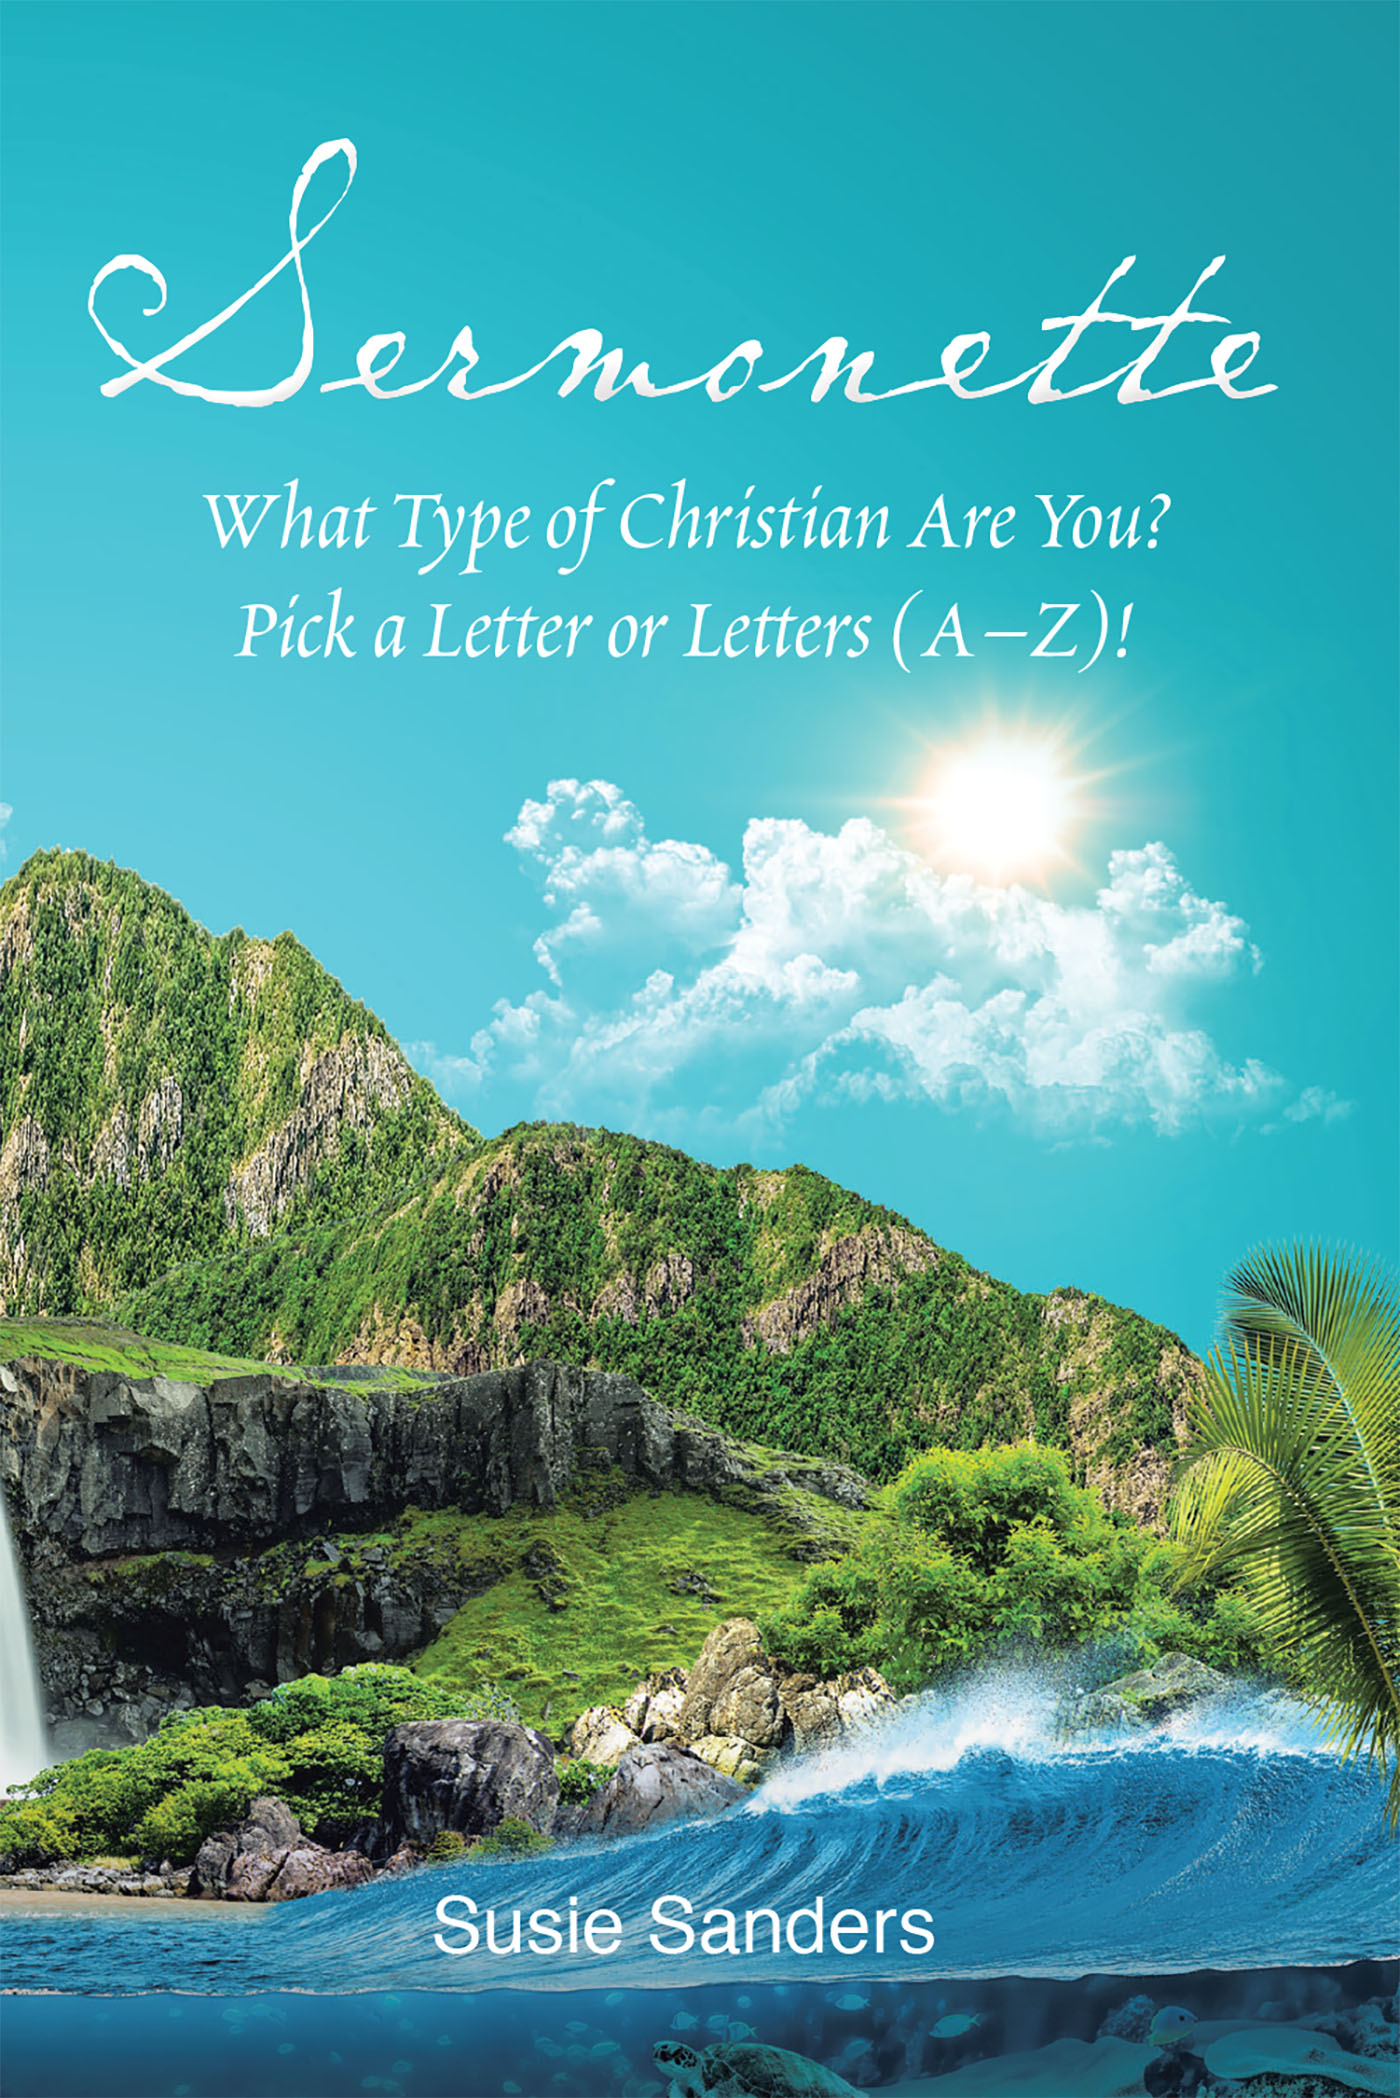 Susie Sanders’s Newly Released “Sermonette: What Type of Christian Are You? Pick a Letter or Letters (A-Z)!” is a Thoughtful Resource for Inspiration